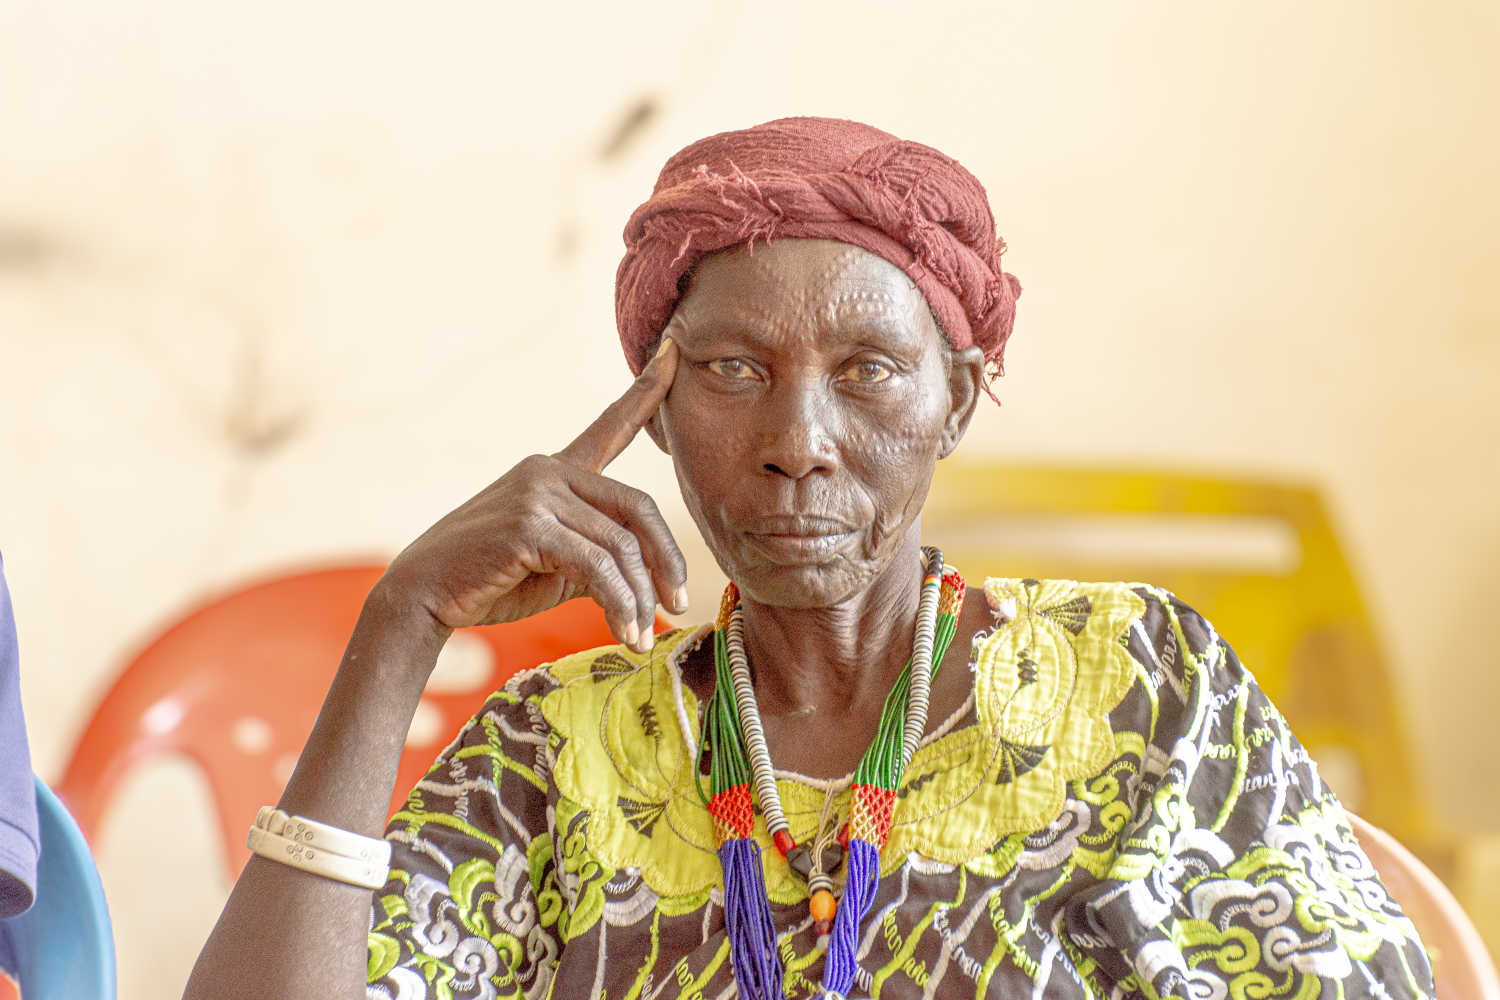 Lucia Lokitoi, farmer, and a member of one of the peace committees in South Sudan